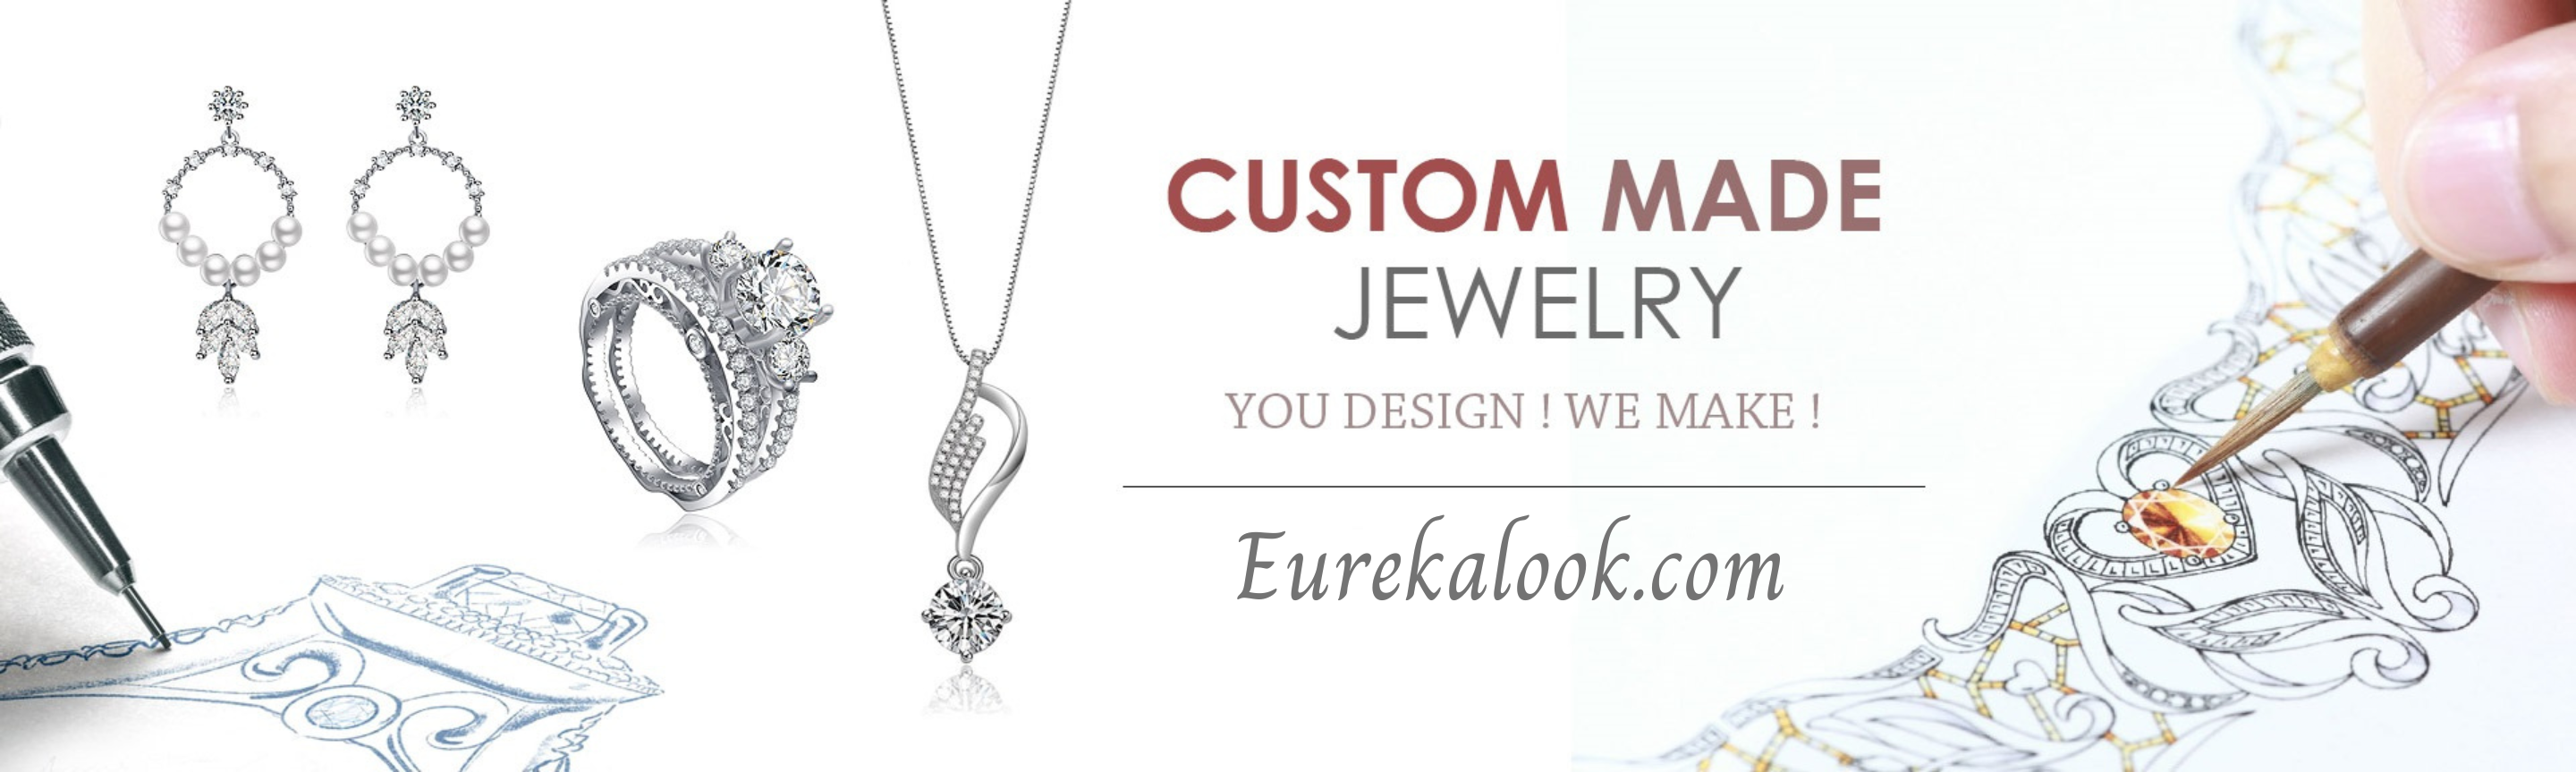 Design Your Own Custom Jewelry | Top Ideas For Designing Your Own Moissanite Jewelry